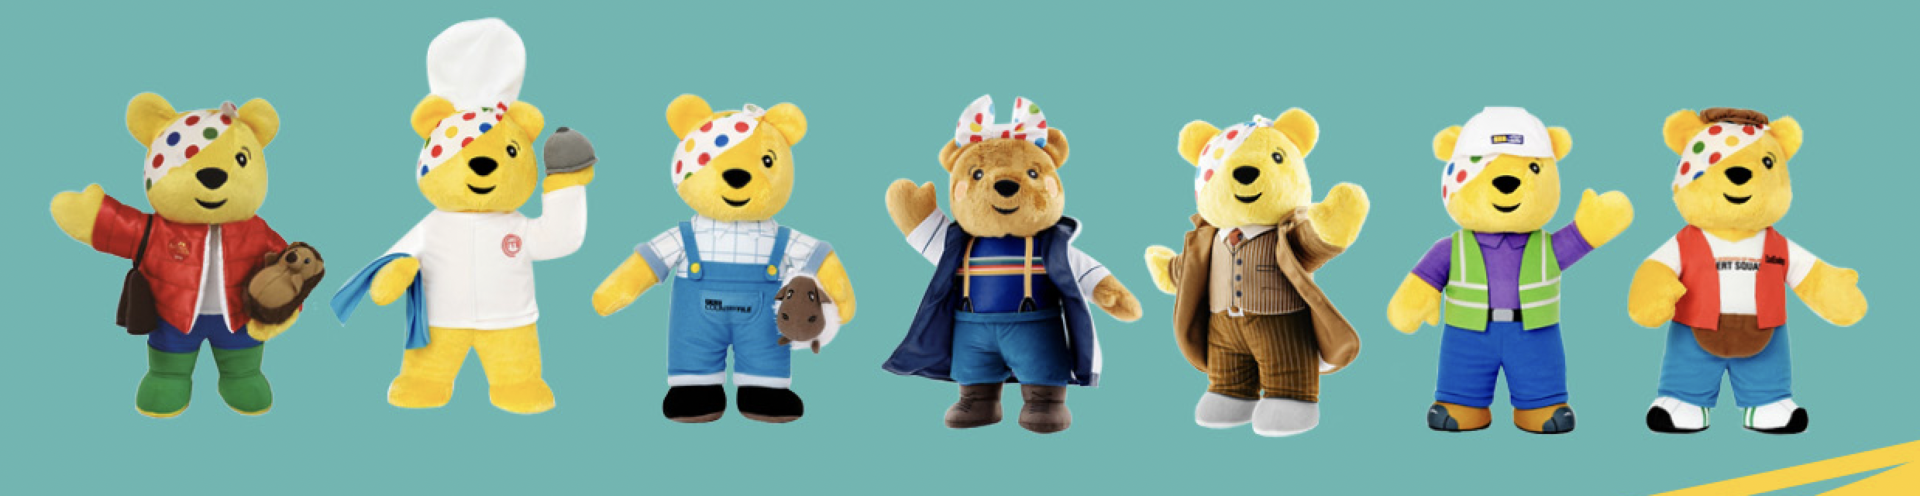 Limited Edition Pudsey Bears